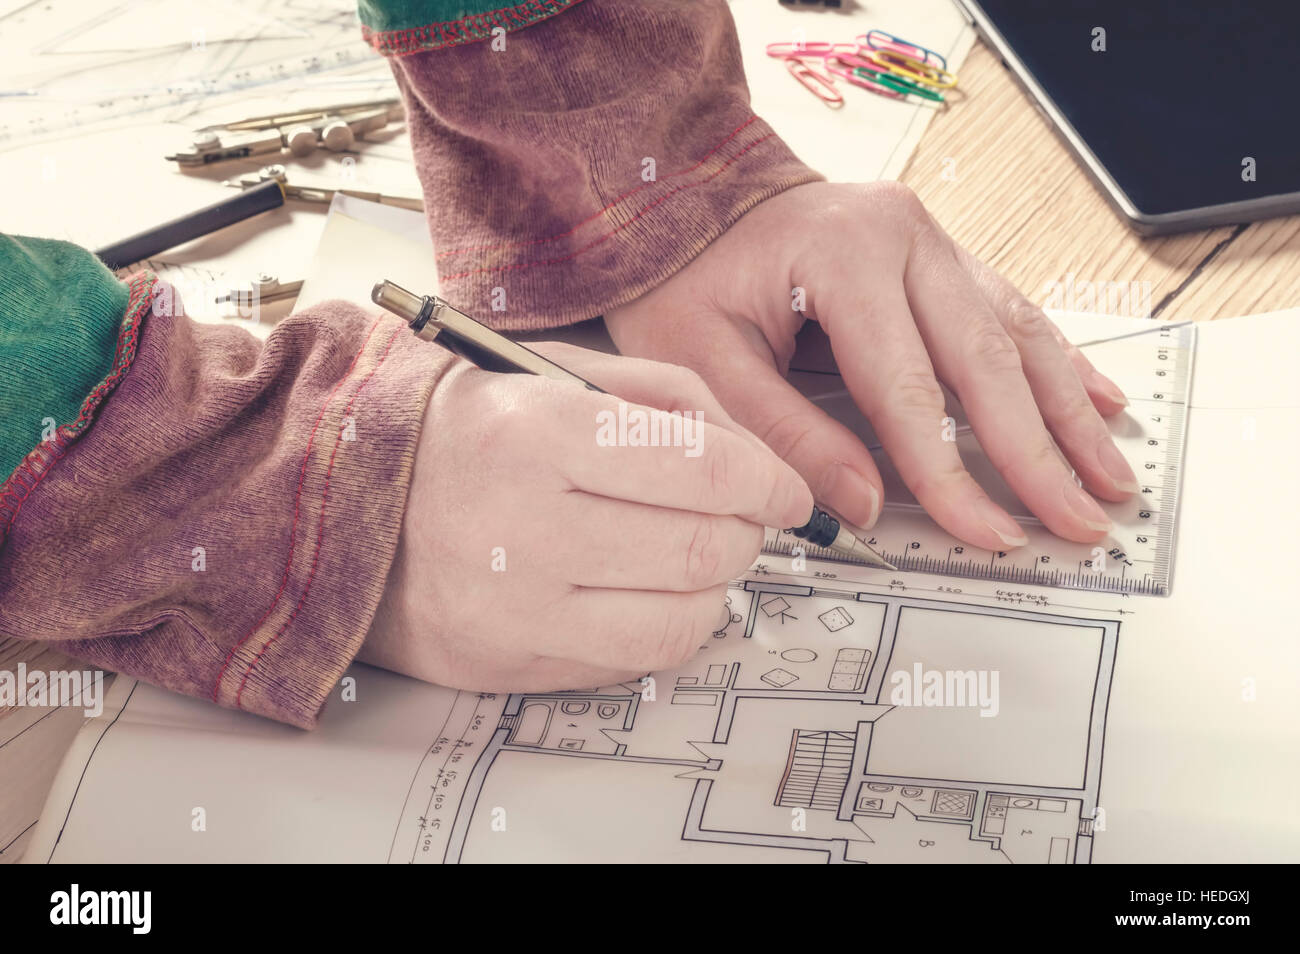 Architect drawing on architectural project. Hand writing on architectural plan. Construction concept. Stock Photo